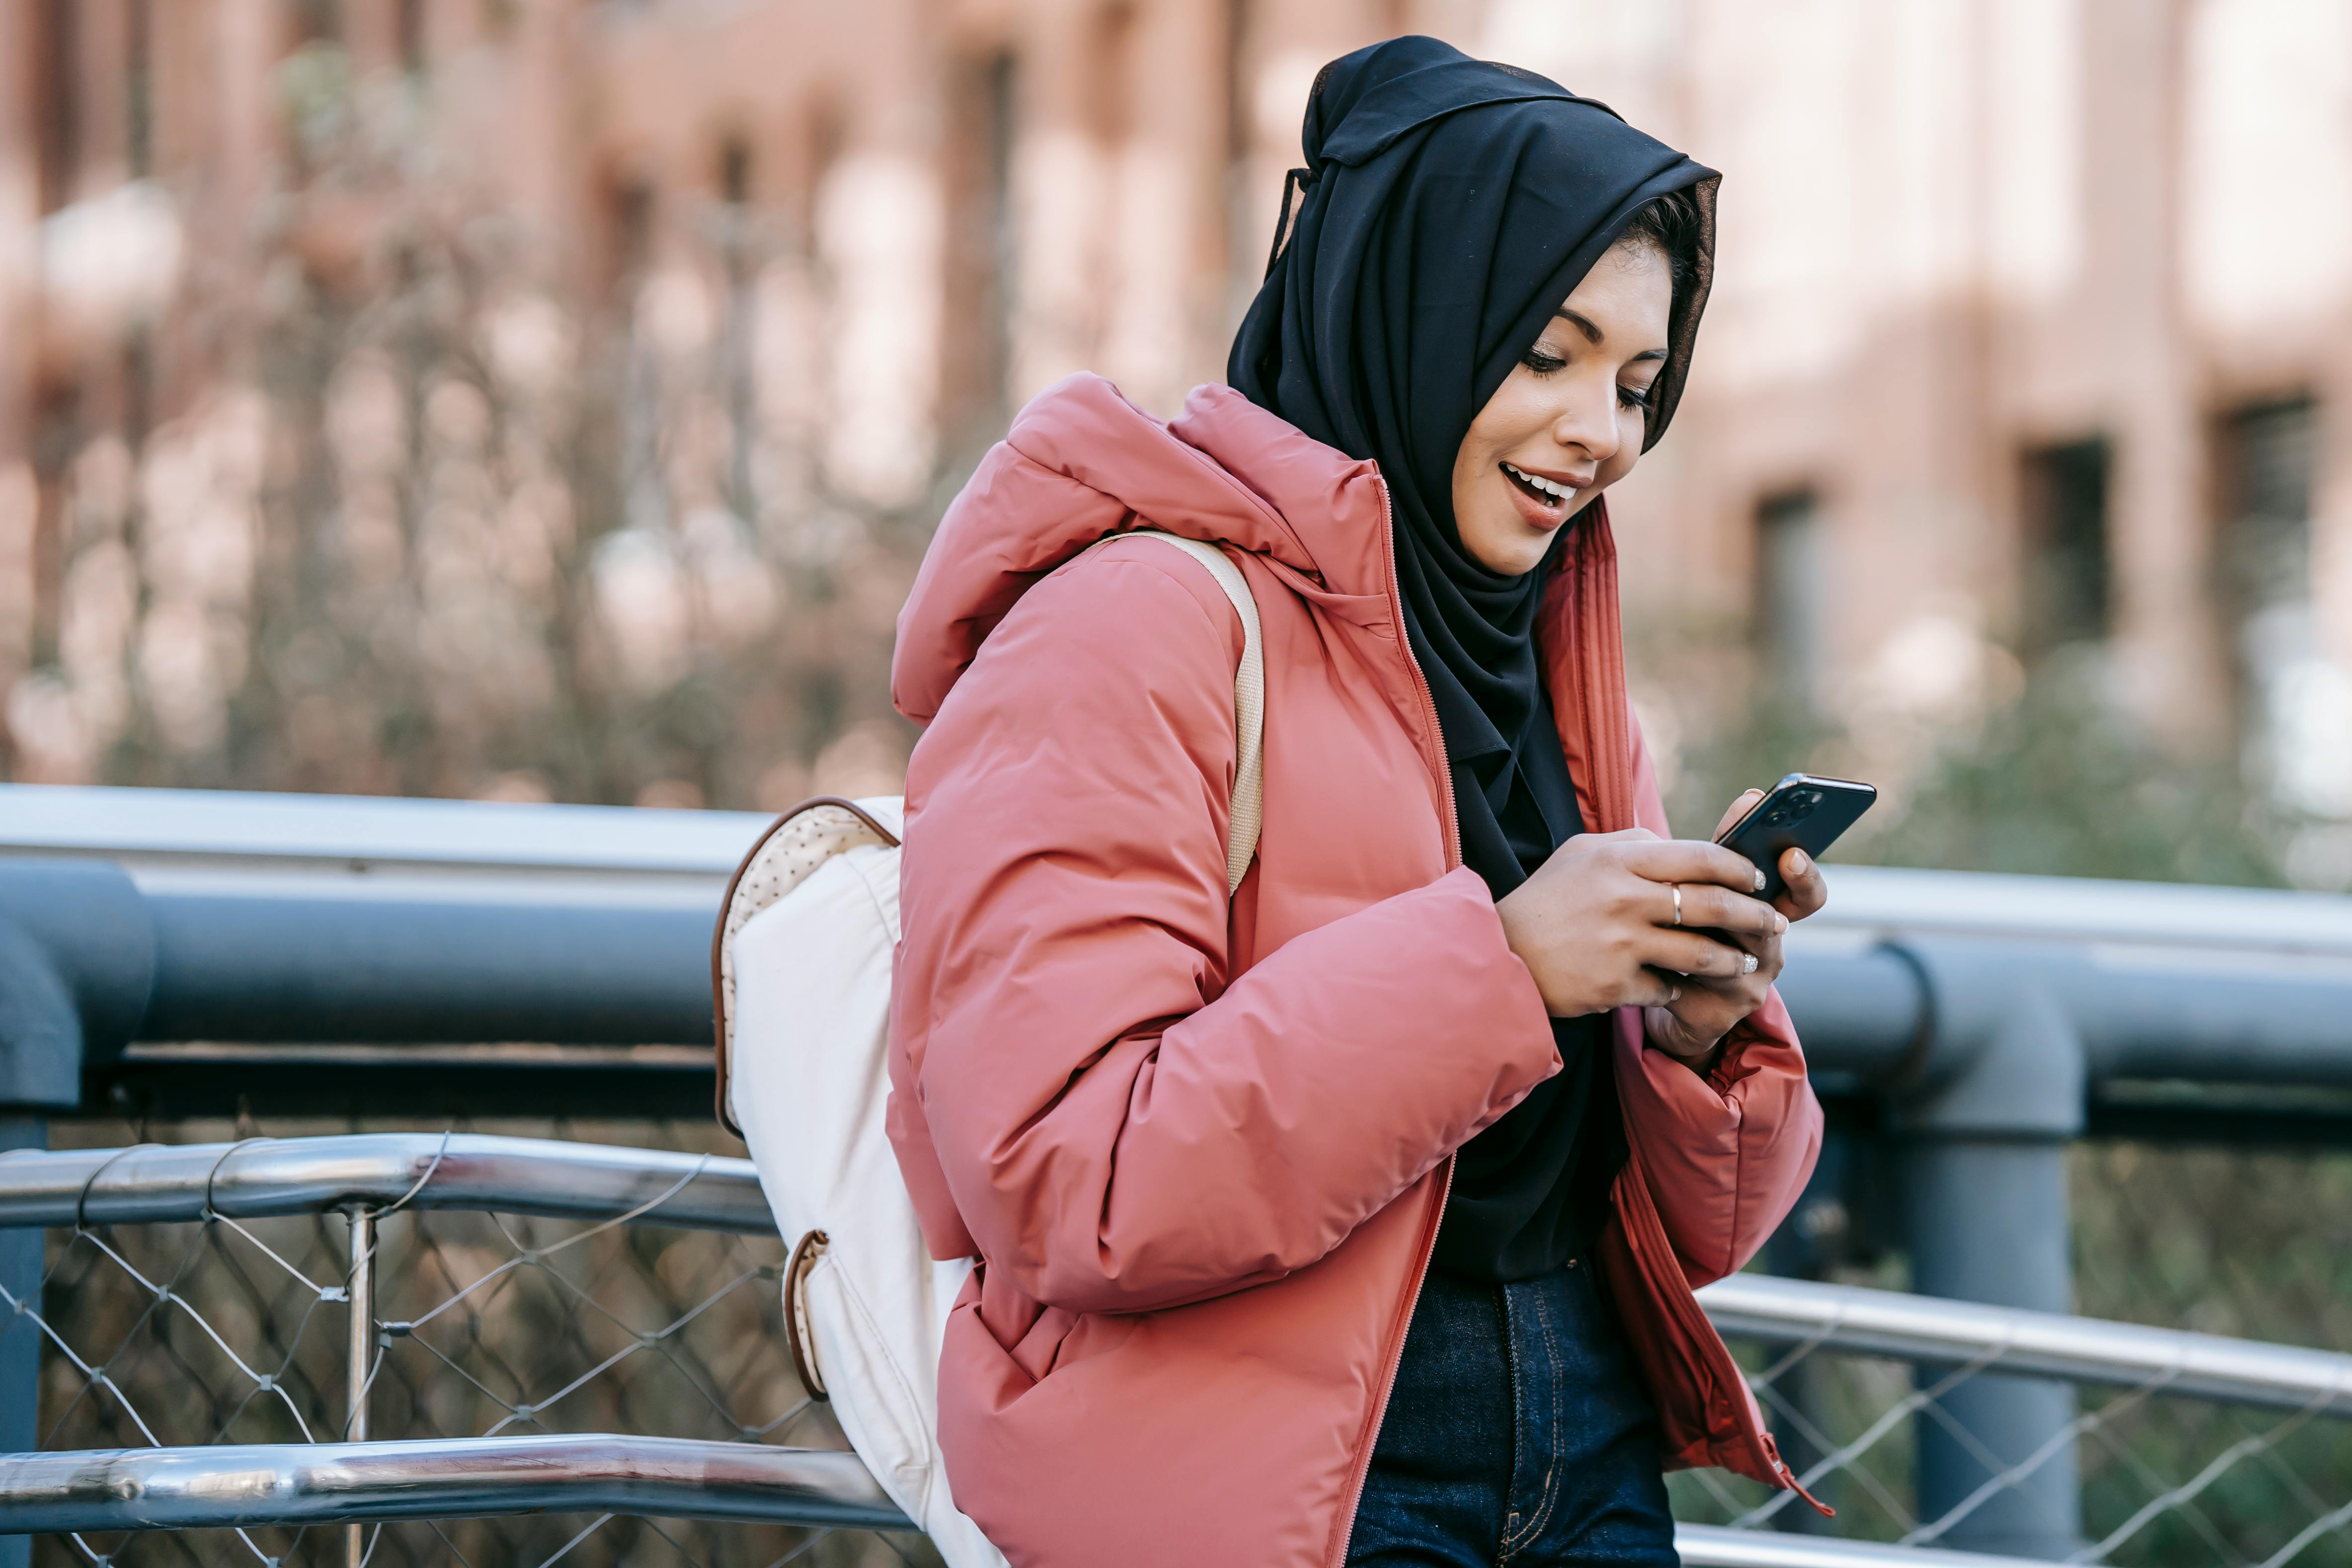 muslim smiling ethnic woman in hijab checking smartphone